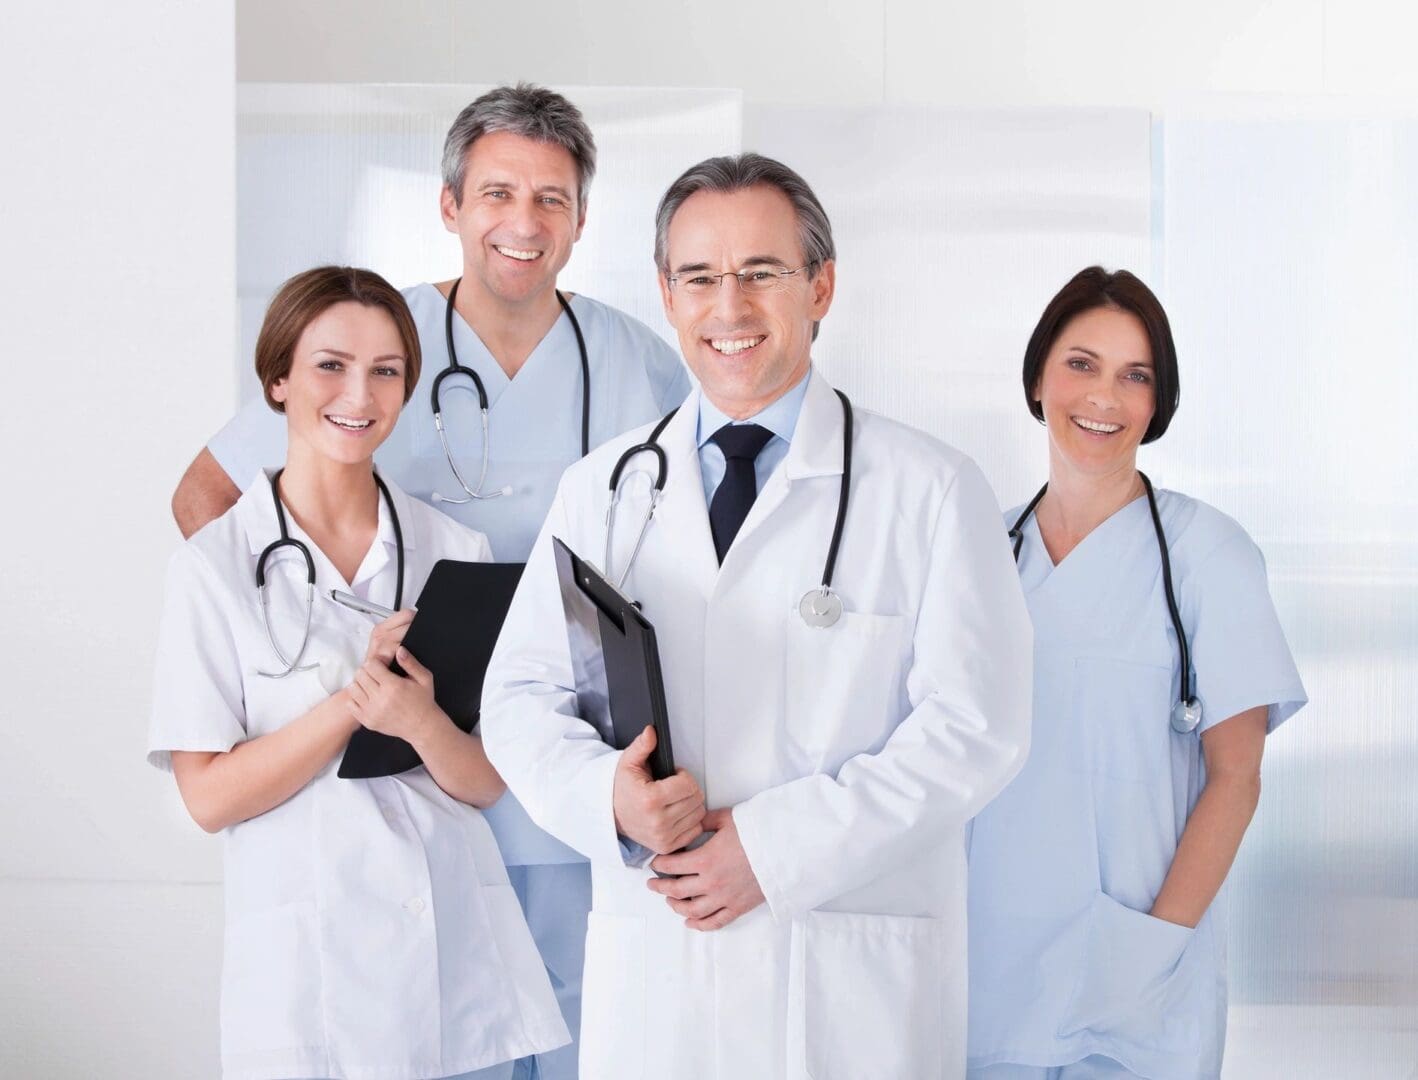 A group of doctors standing in a room.